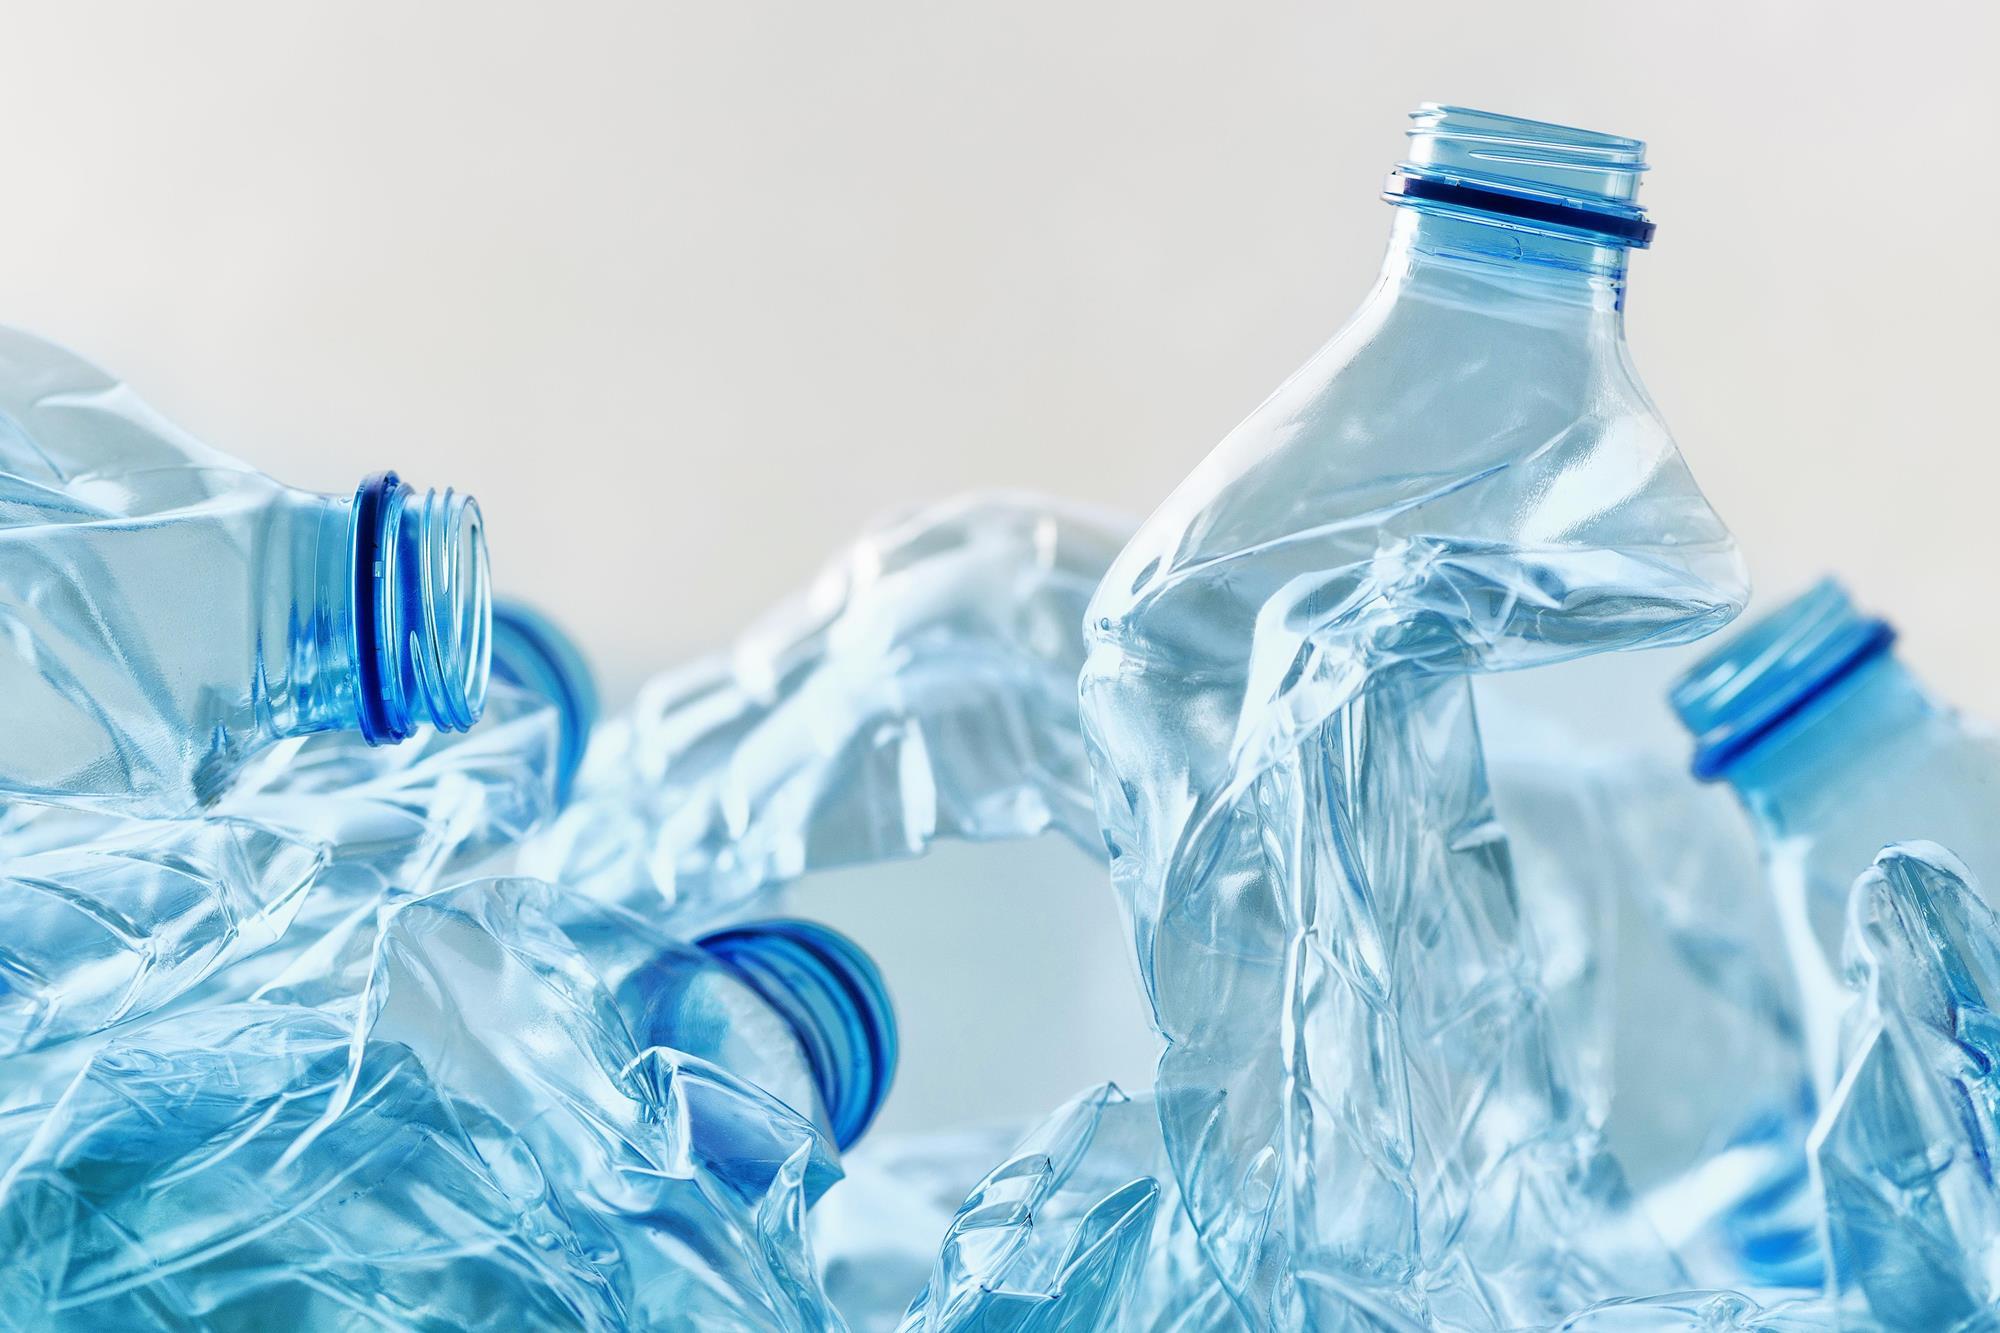 How to quickly identify impurities in plastic materials, Sponsored